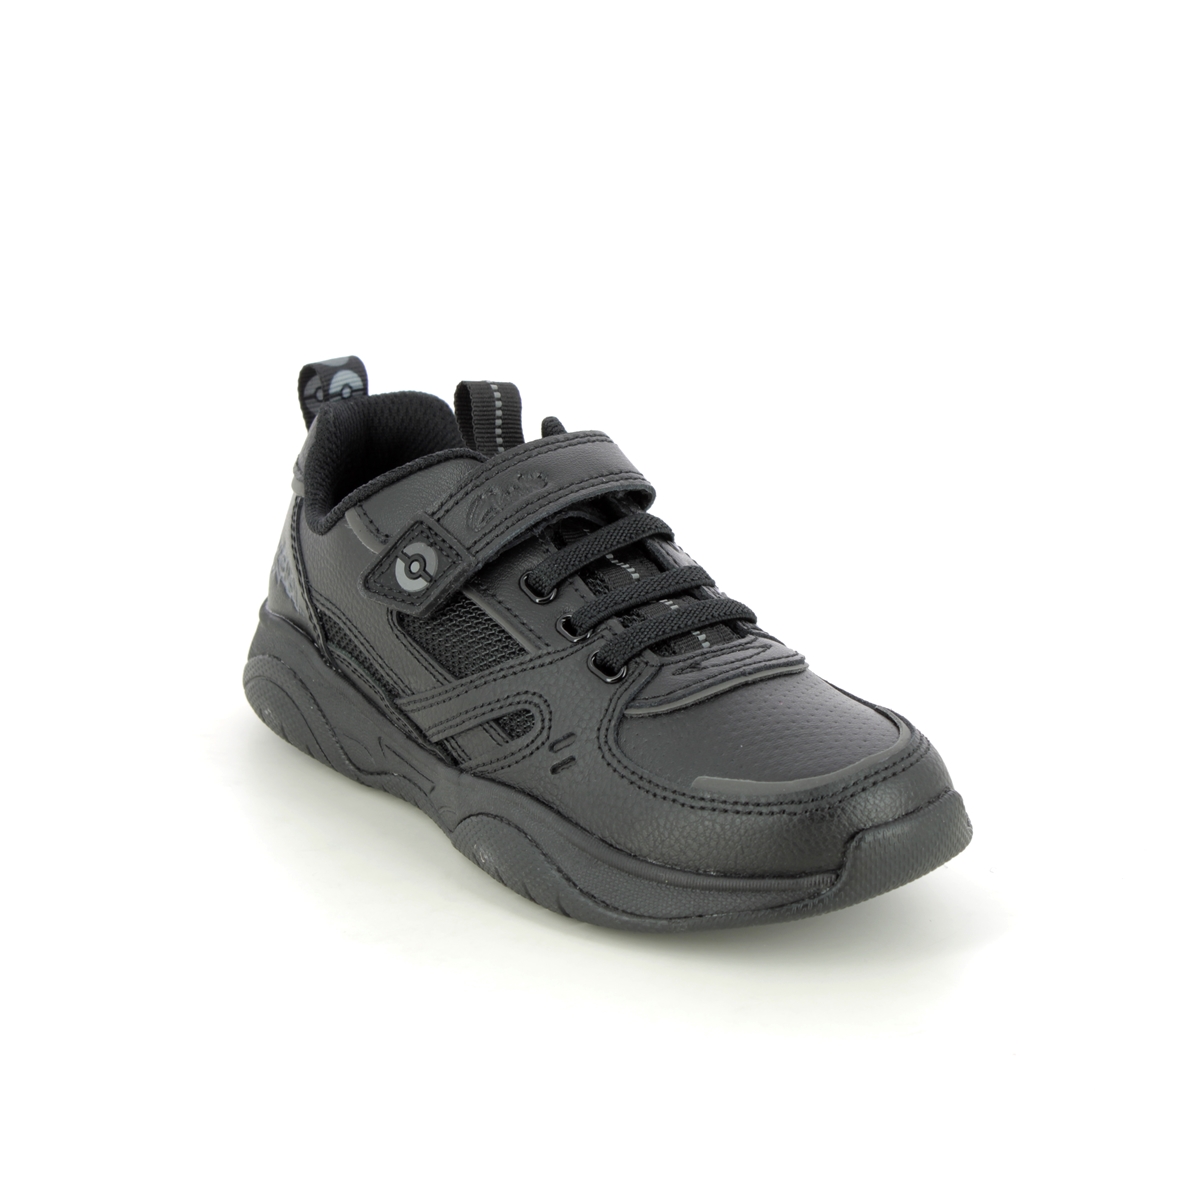 Clarks Pokemon Grip Trade K Black Leather Kids Boys Trainers 693486F In Size 11 In Plain Black Leather F Width Fitting Regular Fit For School For kids